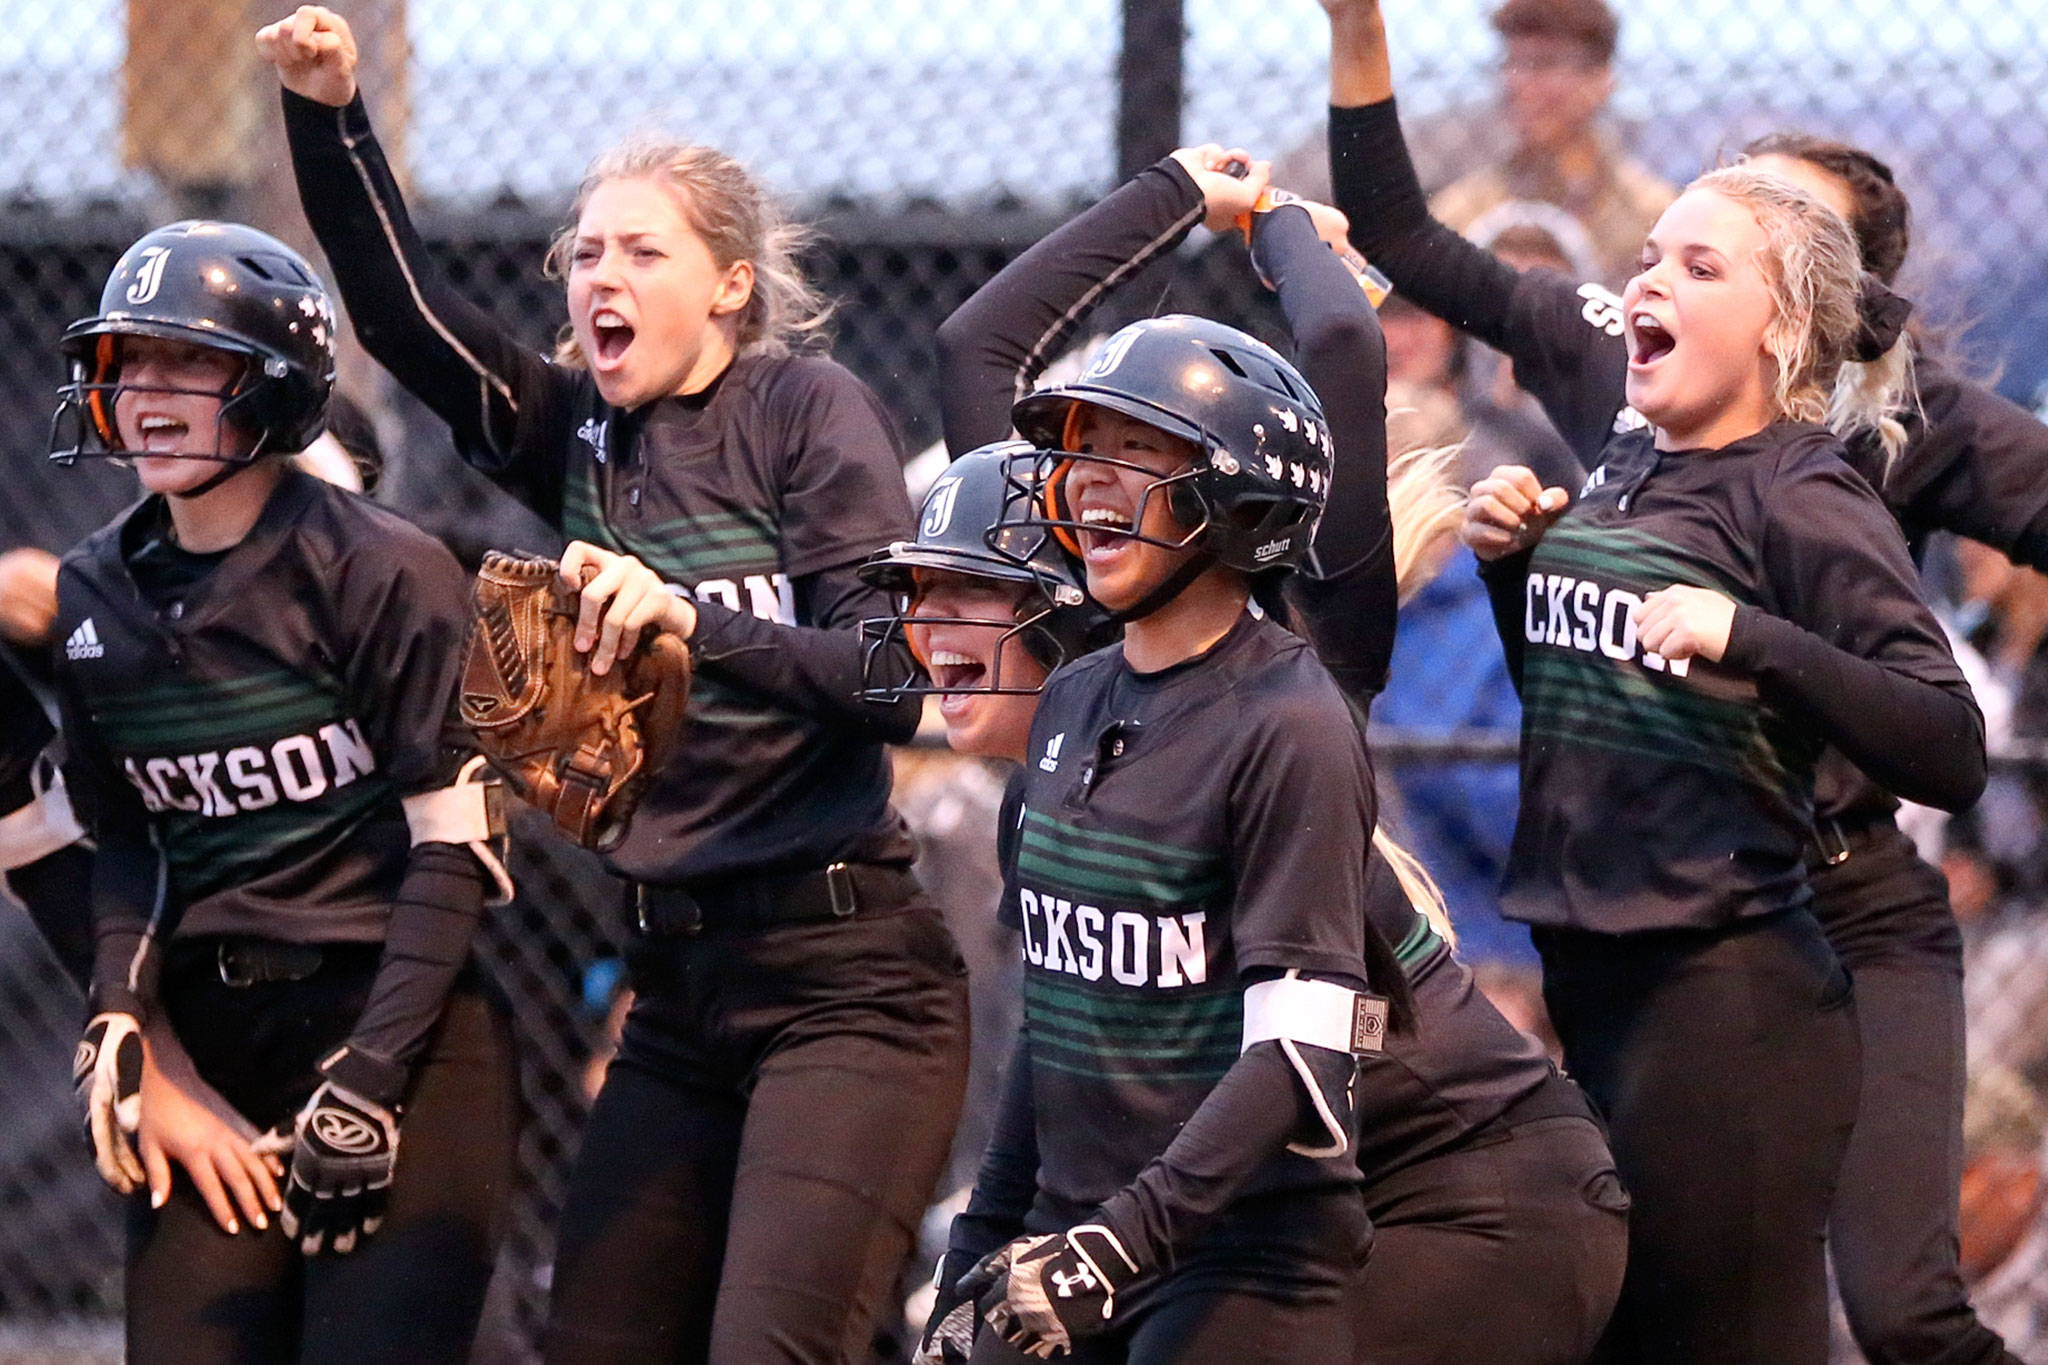 Jackson players celebrate a fourth-inning solo home run by Laina Delgado during a 5-3 win over Lake Stevens in a 4A Wes-King Bi-District semifinal Wednesday at Phil Johnson Ballfields in Everett. The Timberwolves clinched their fifth consecutive state berth with the victory. (Kevin Clark / The Herald)